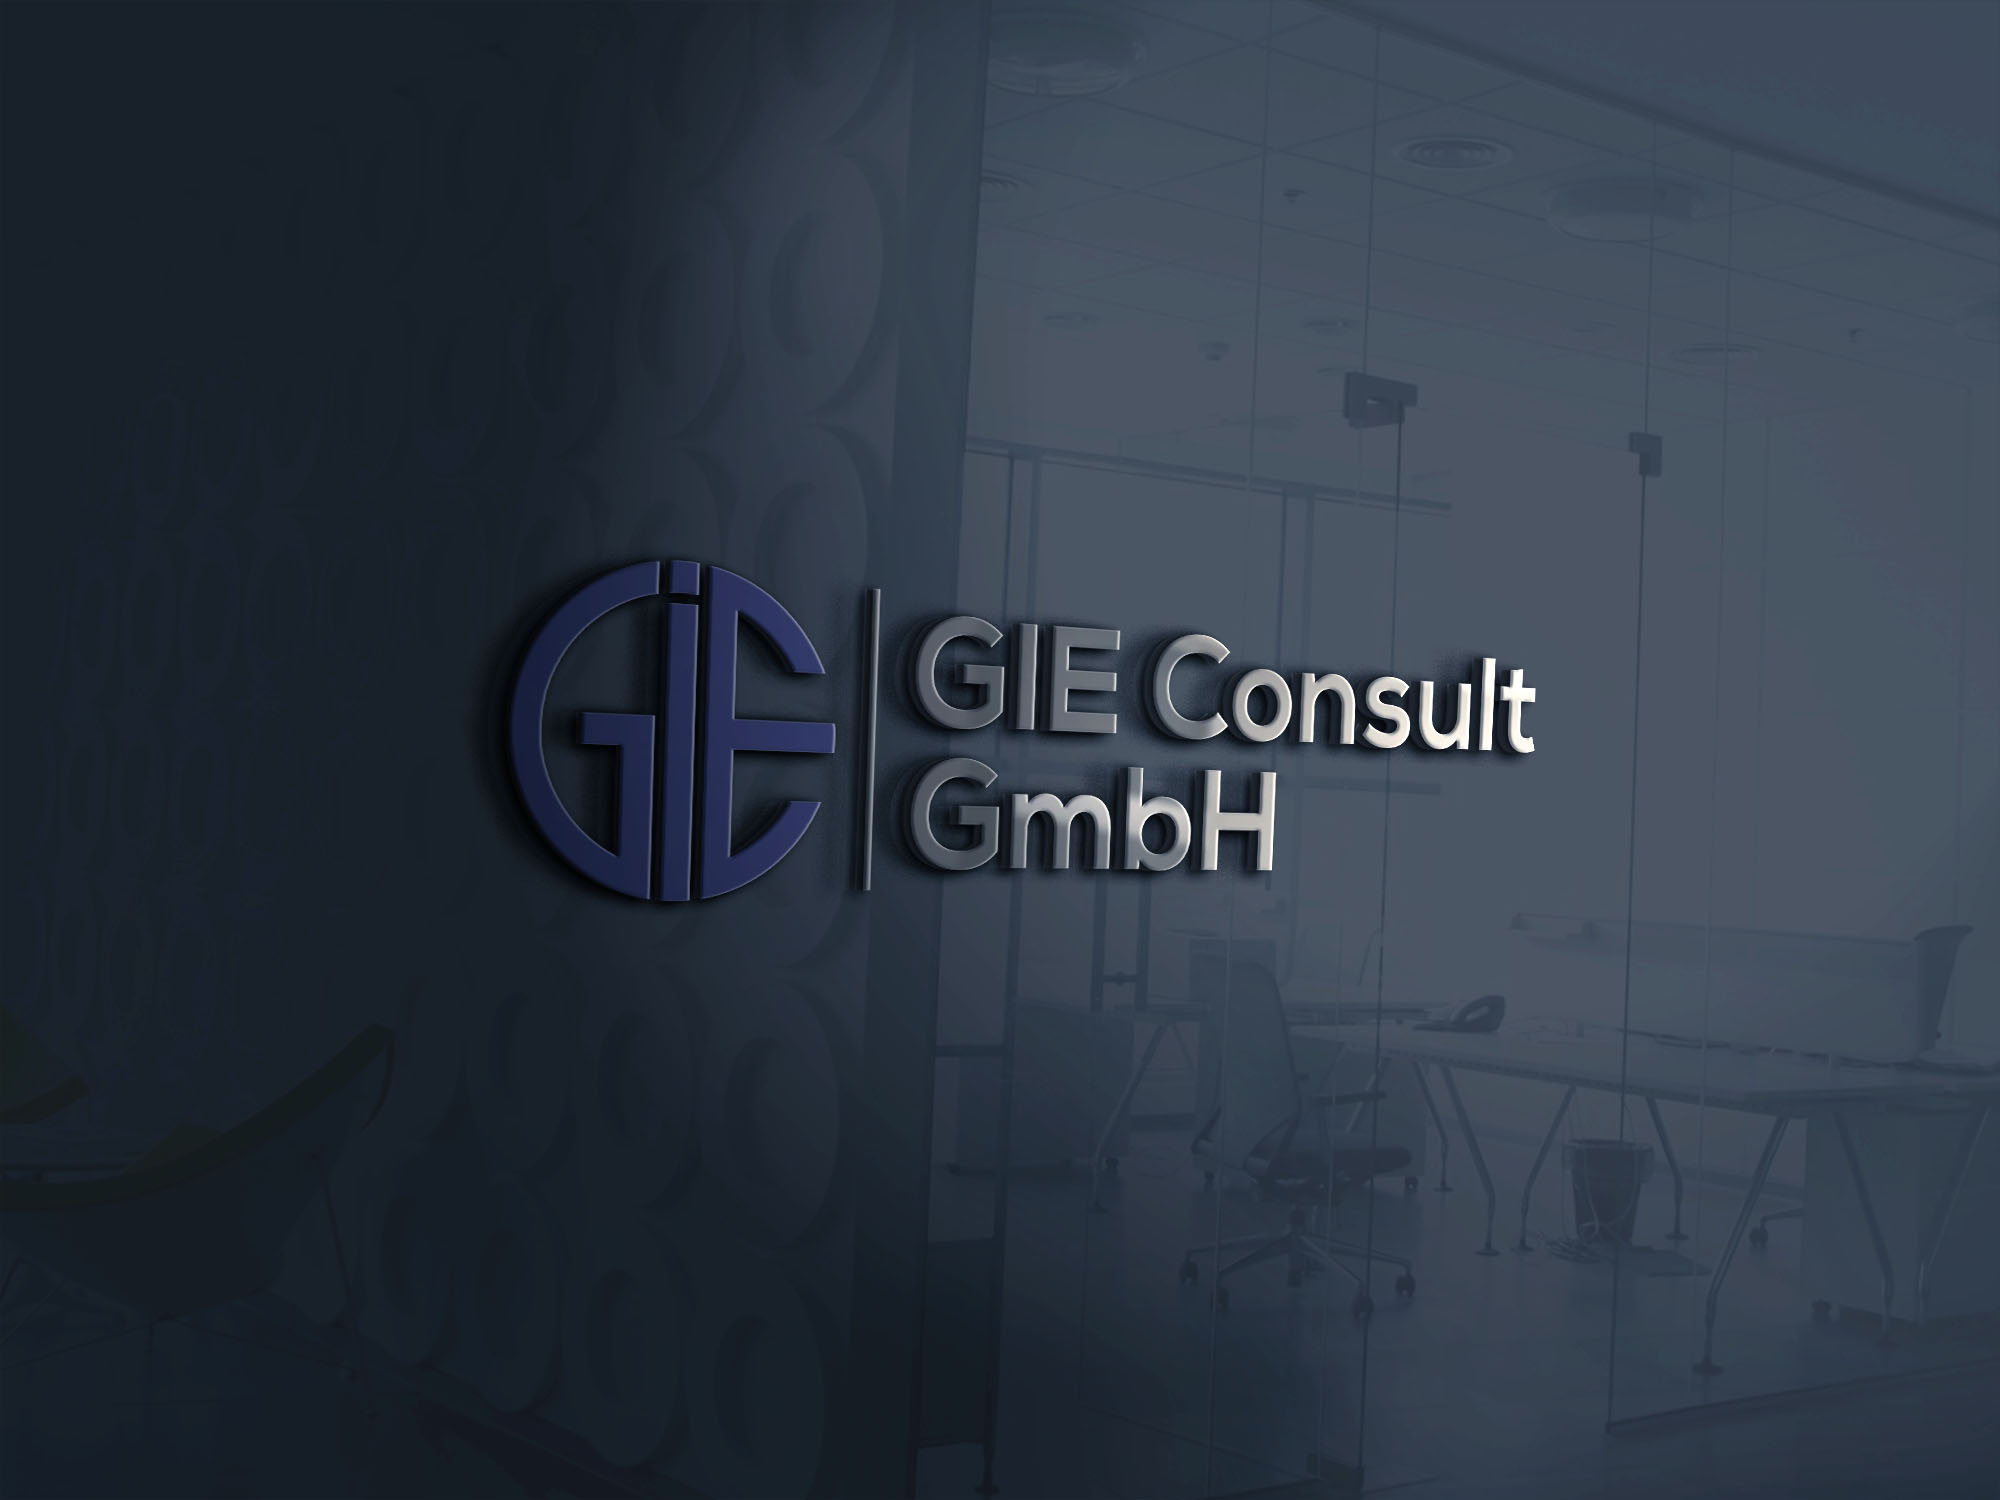 GIE Consult GmbH